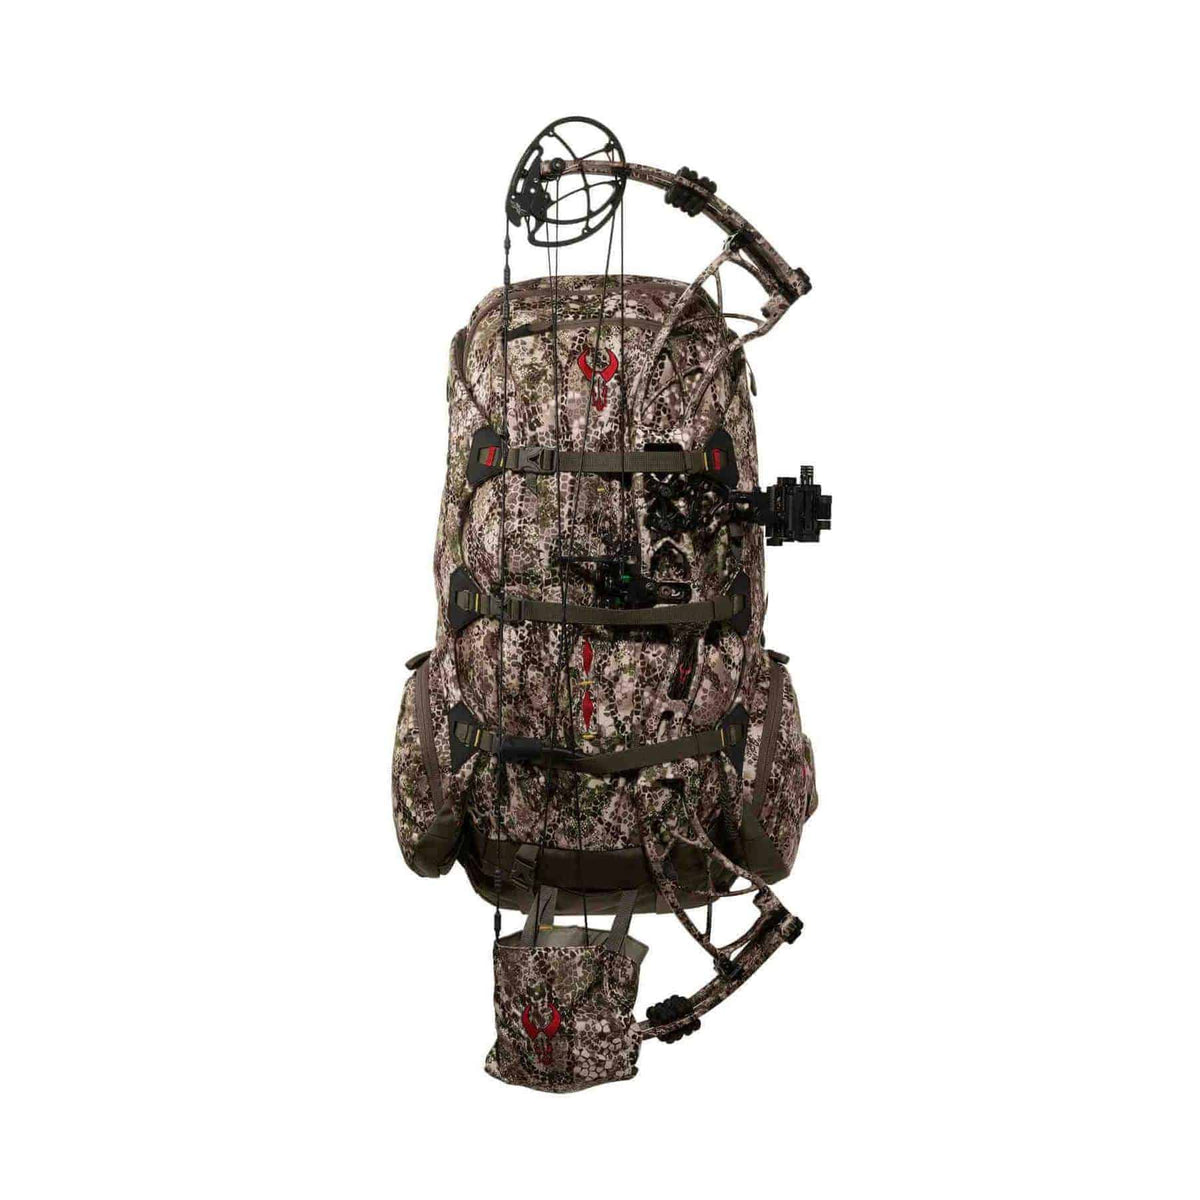 Badlands Packs 2200 Hunting Backpack 2020 Model Approach Camo Back Bow Boot